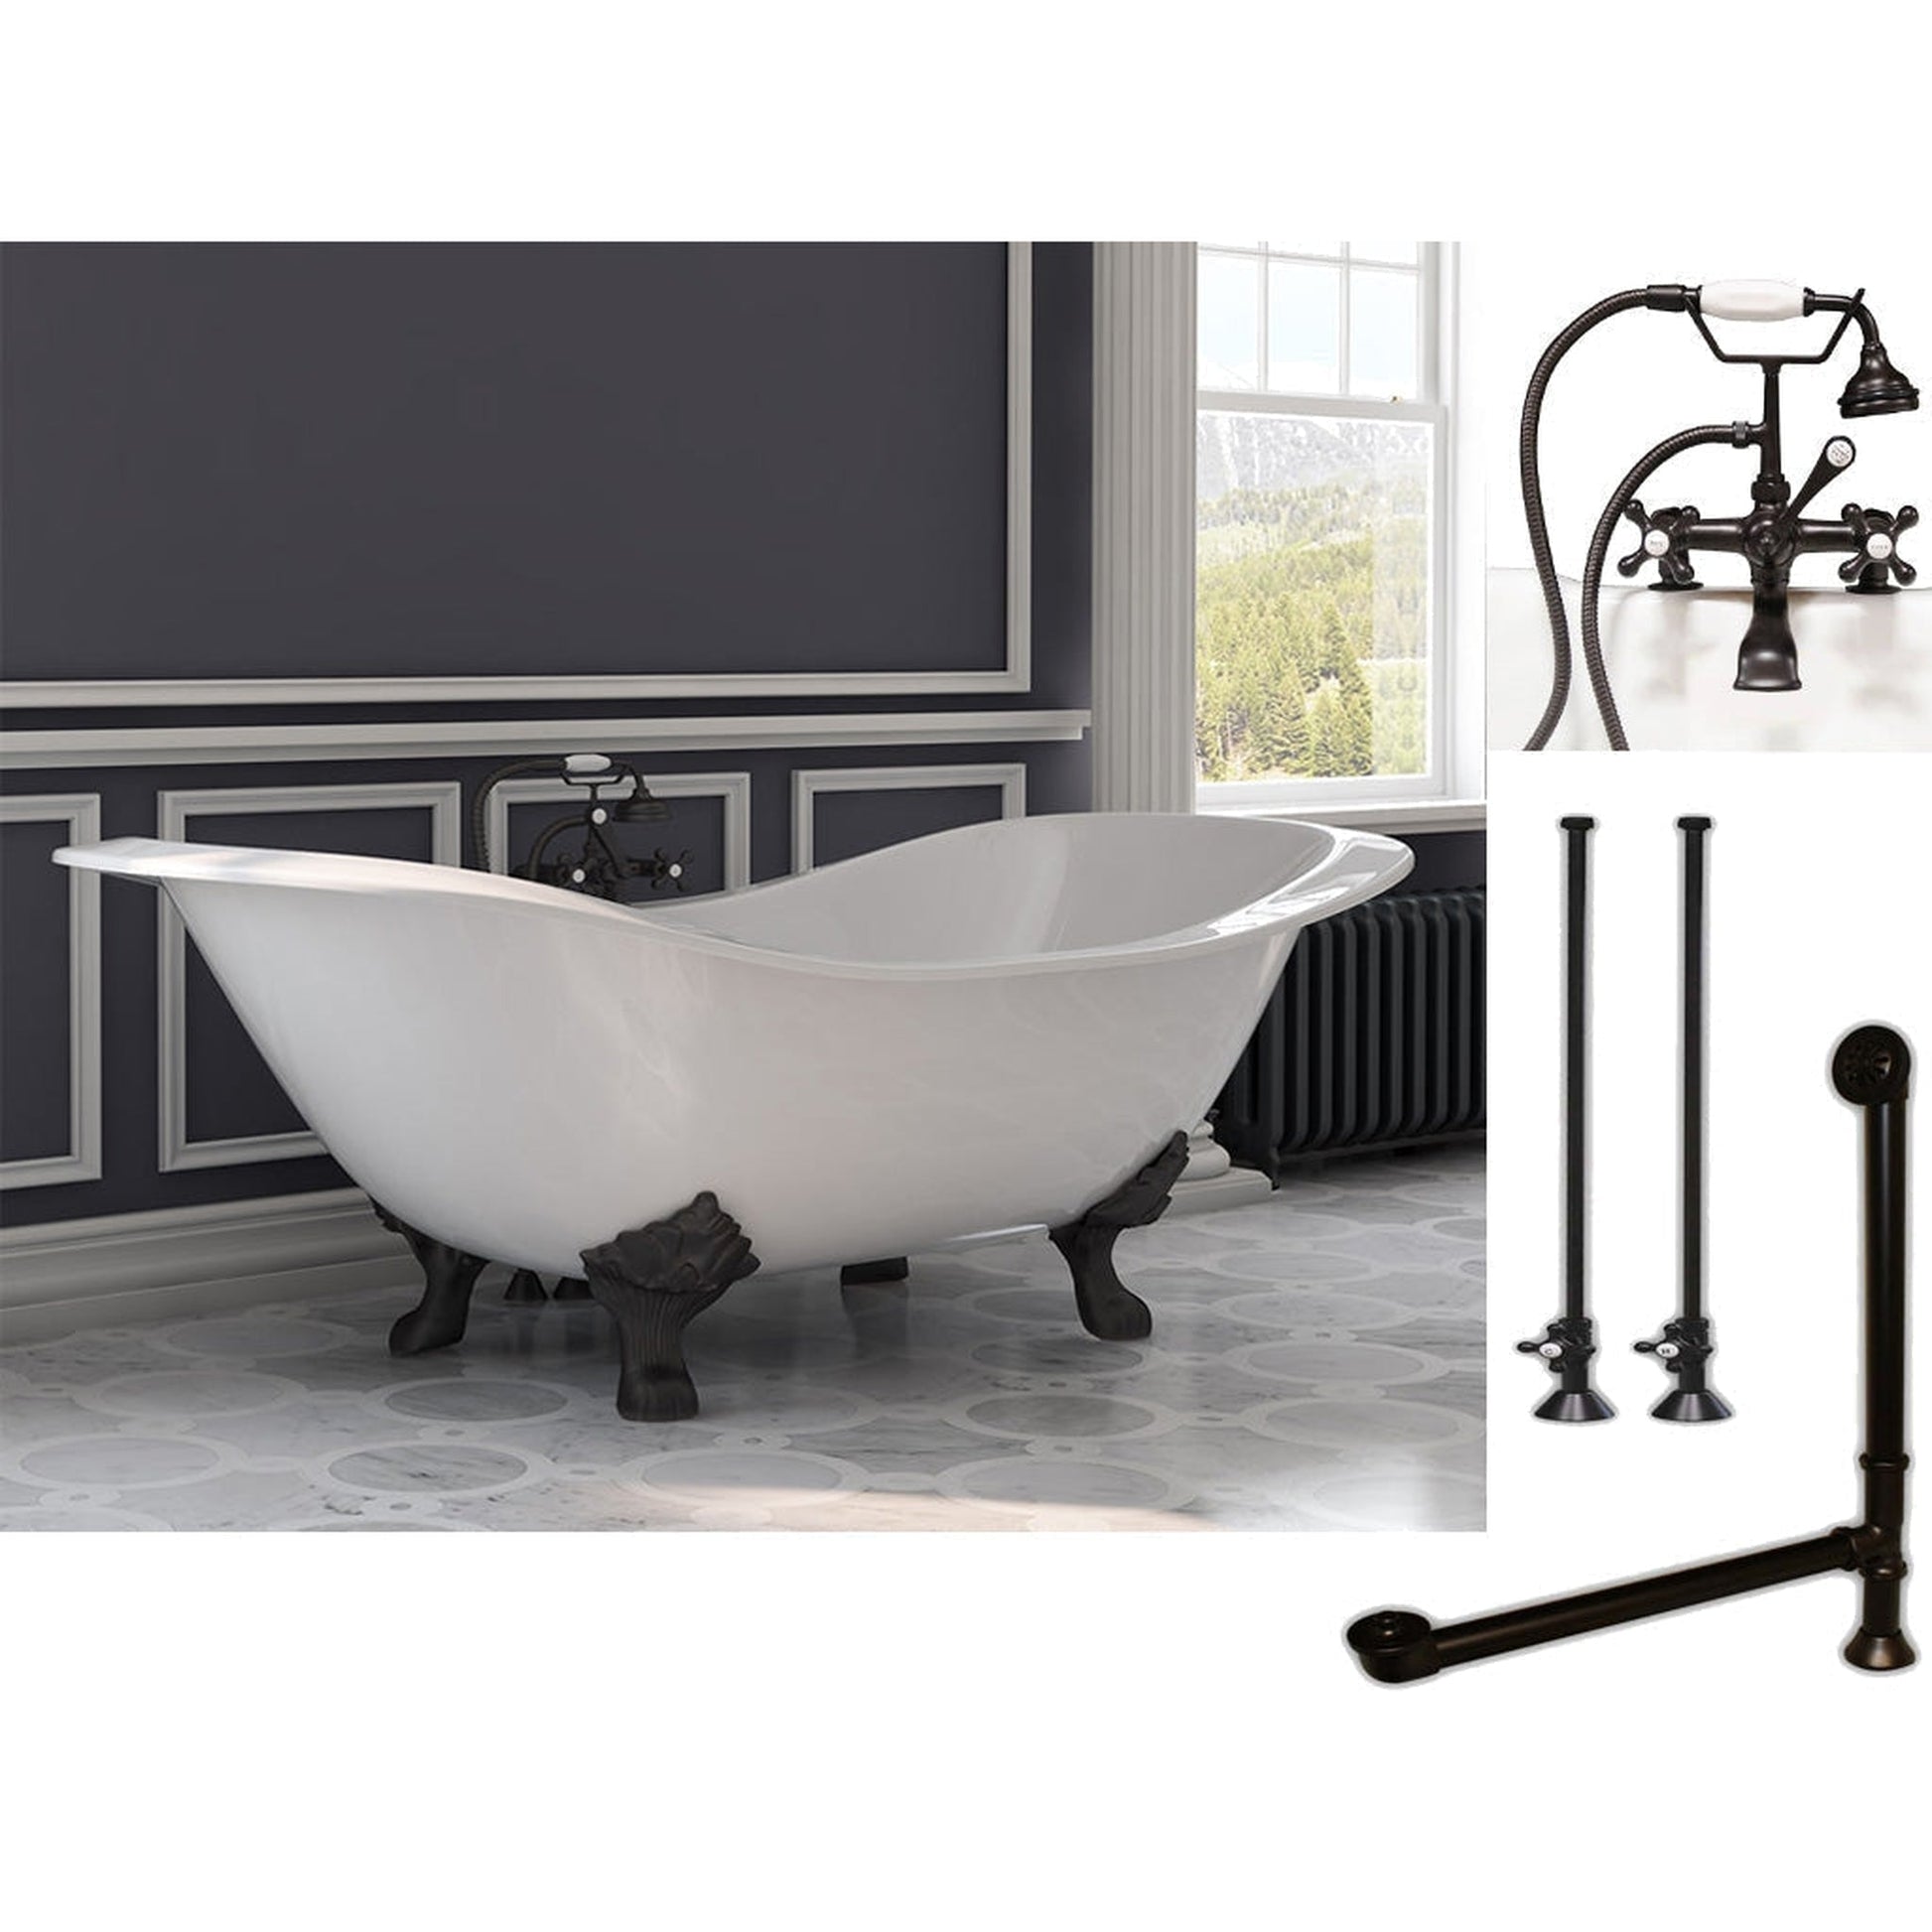 Cambridge Plumbing 72" White Cast Iron Double Slipper Clawfoot Bathtub With Deck Holes And Complete Plumbing Package Including 2” Riser Deck Mount Faucet, Supply Lines, Drain And Overflow Assembly In Oil Rubbed Bronze